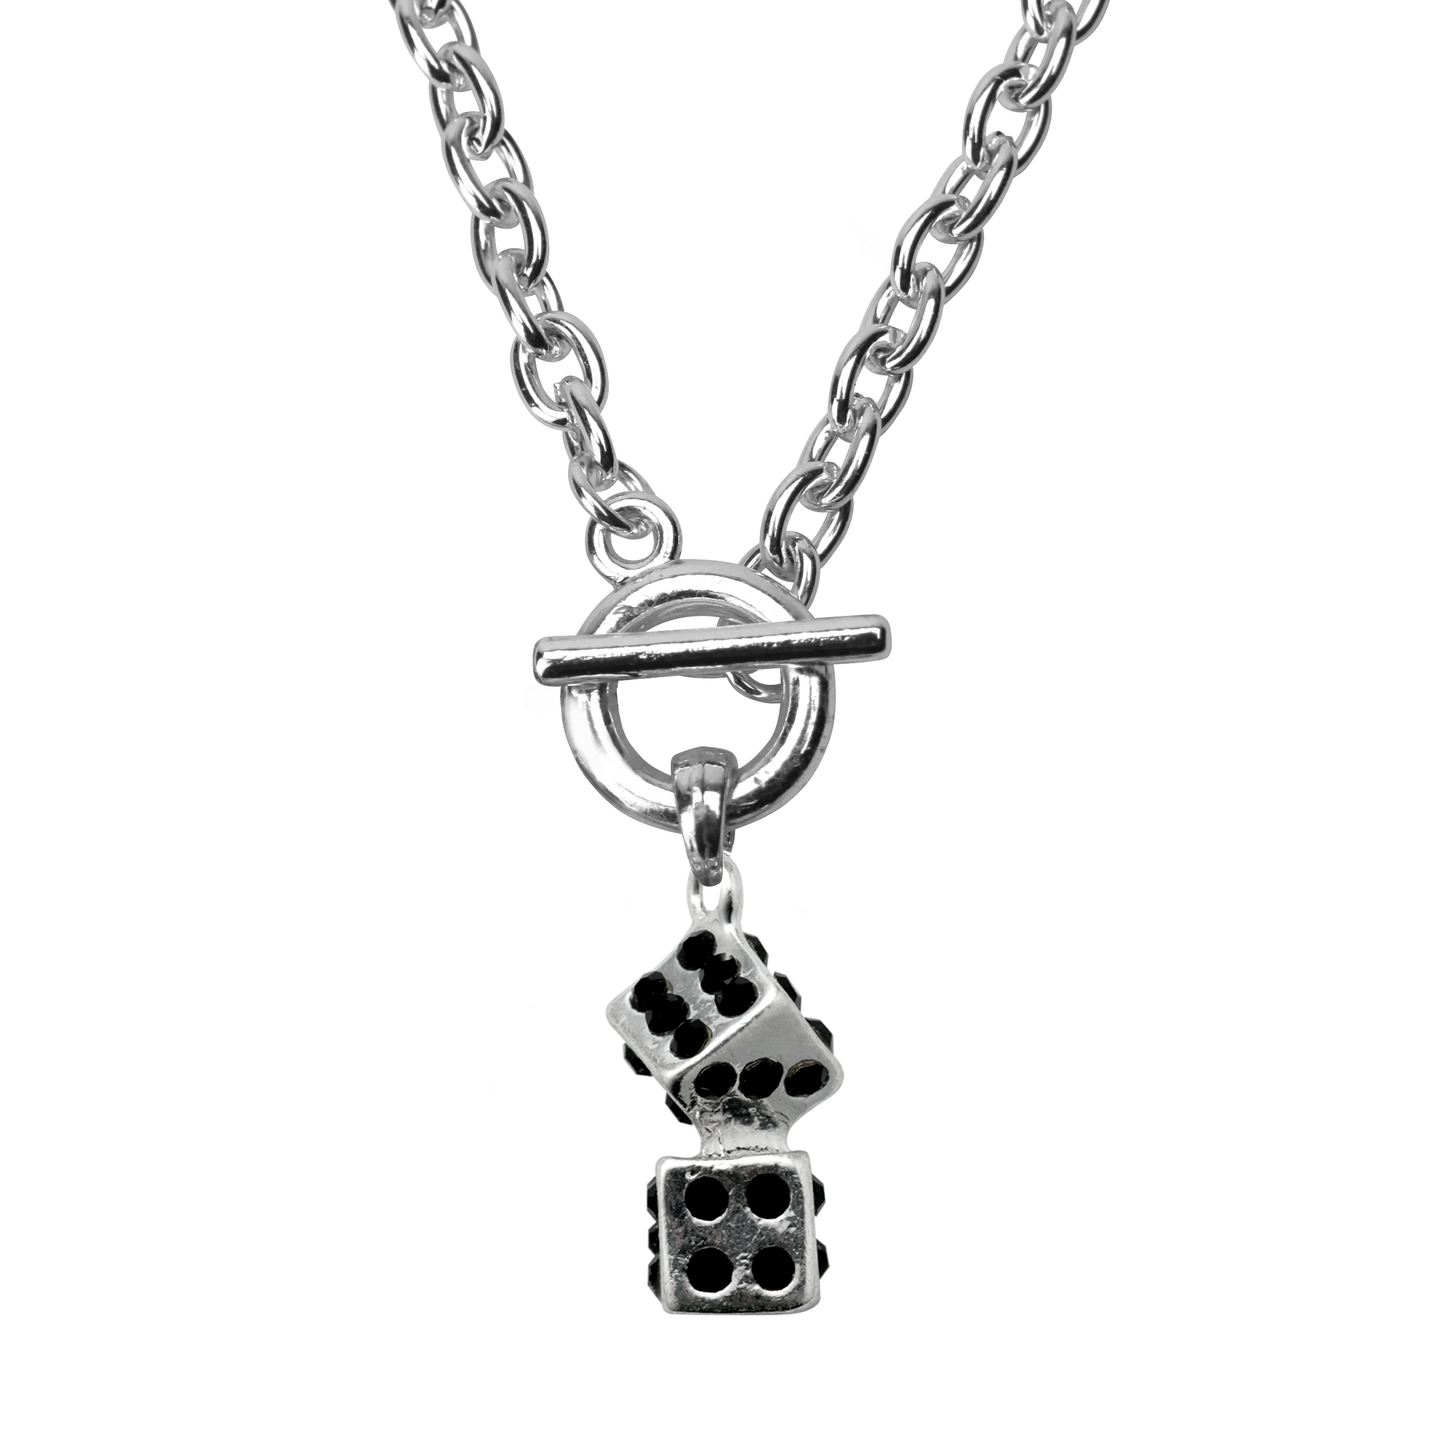 Silver Dice Charm Toggle Necklace